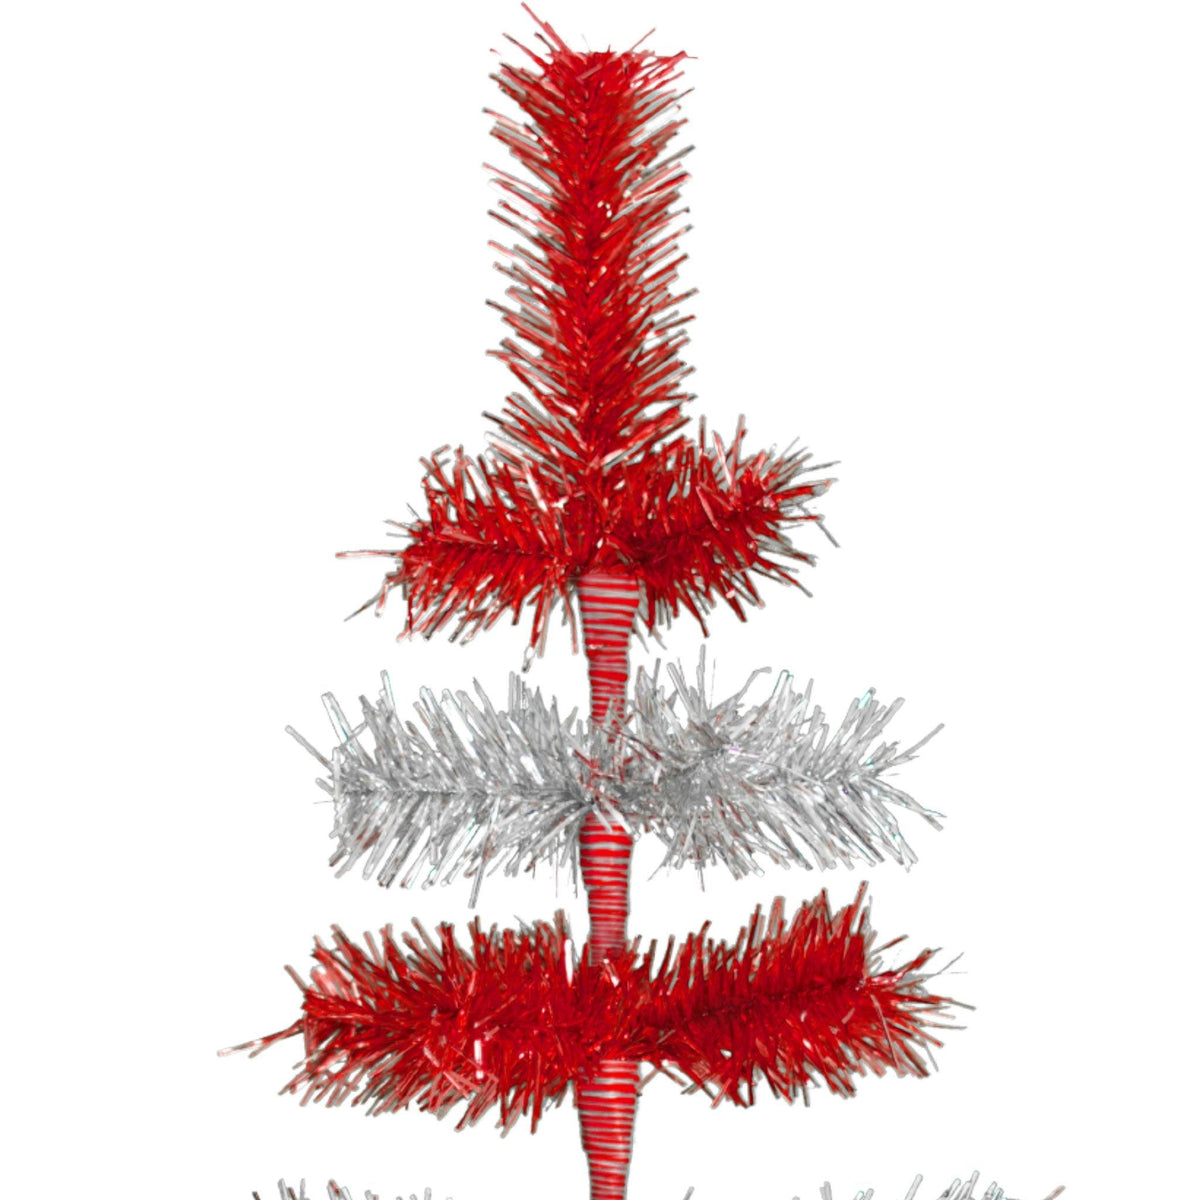 Red & Silver Layered Tinsel Christmas Trees!    Decorate for the holidays with a Shiny Red and Metallic Silver retro-style Christmas Tree.  On sale now at leedisplay.com